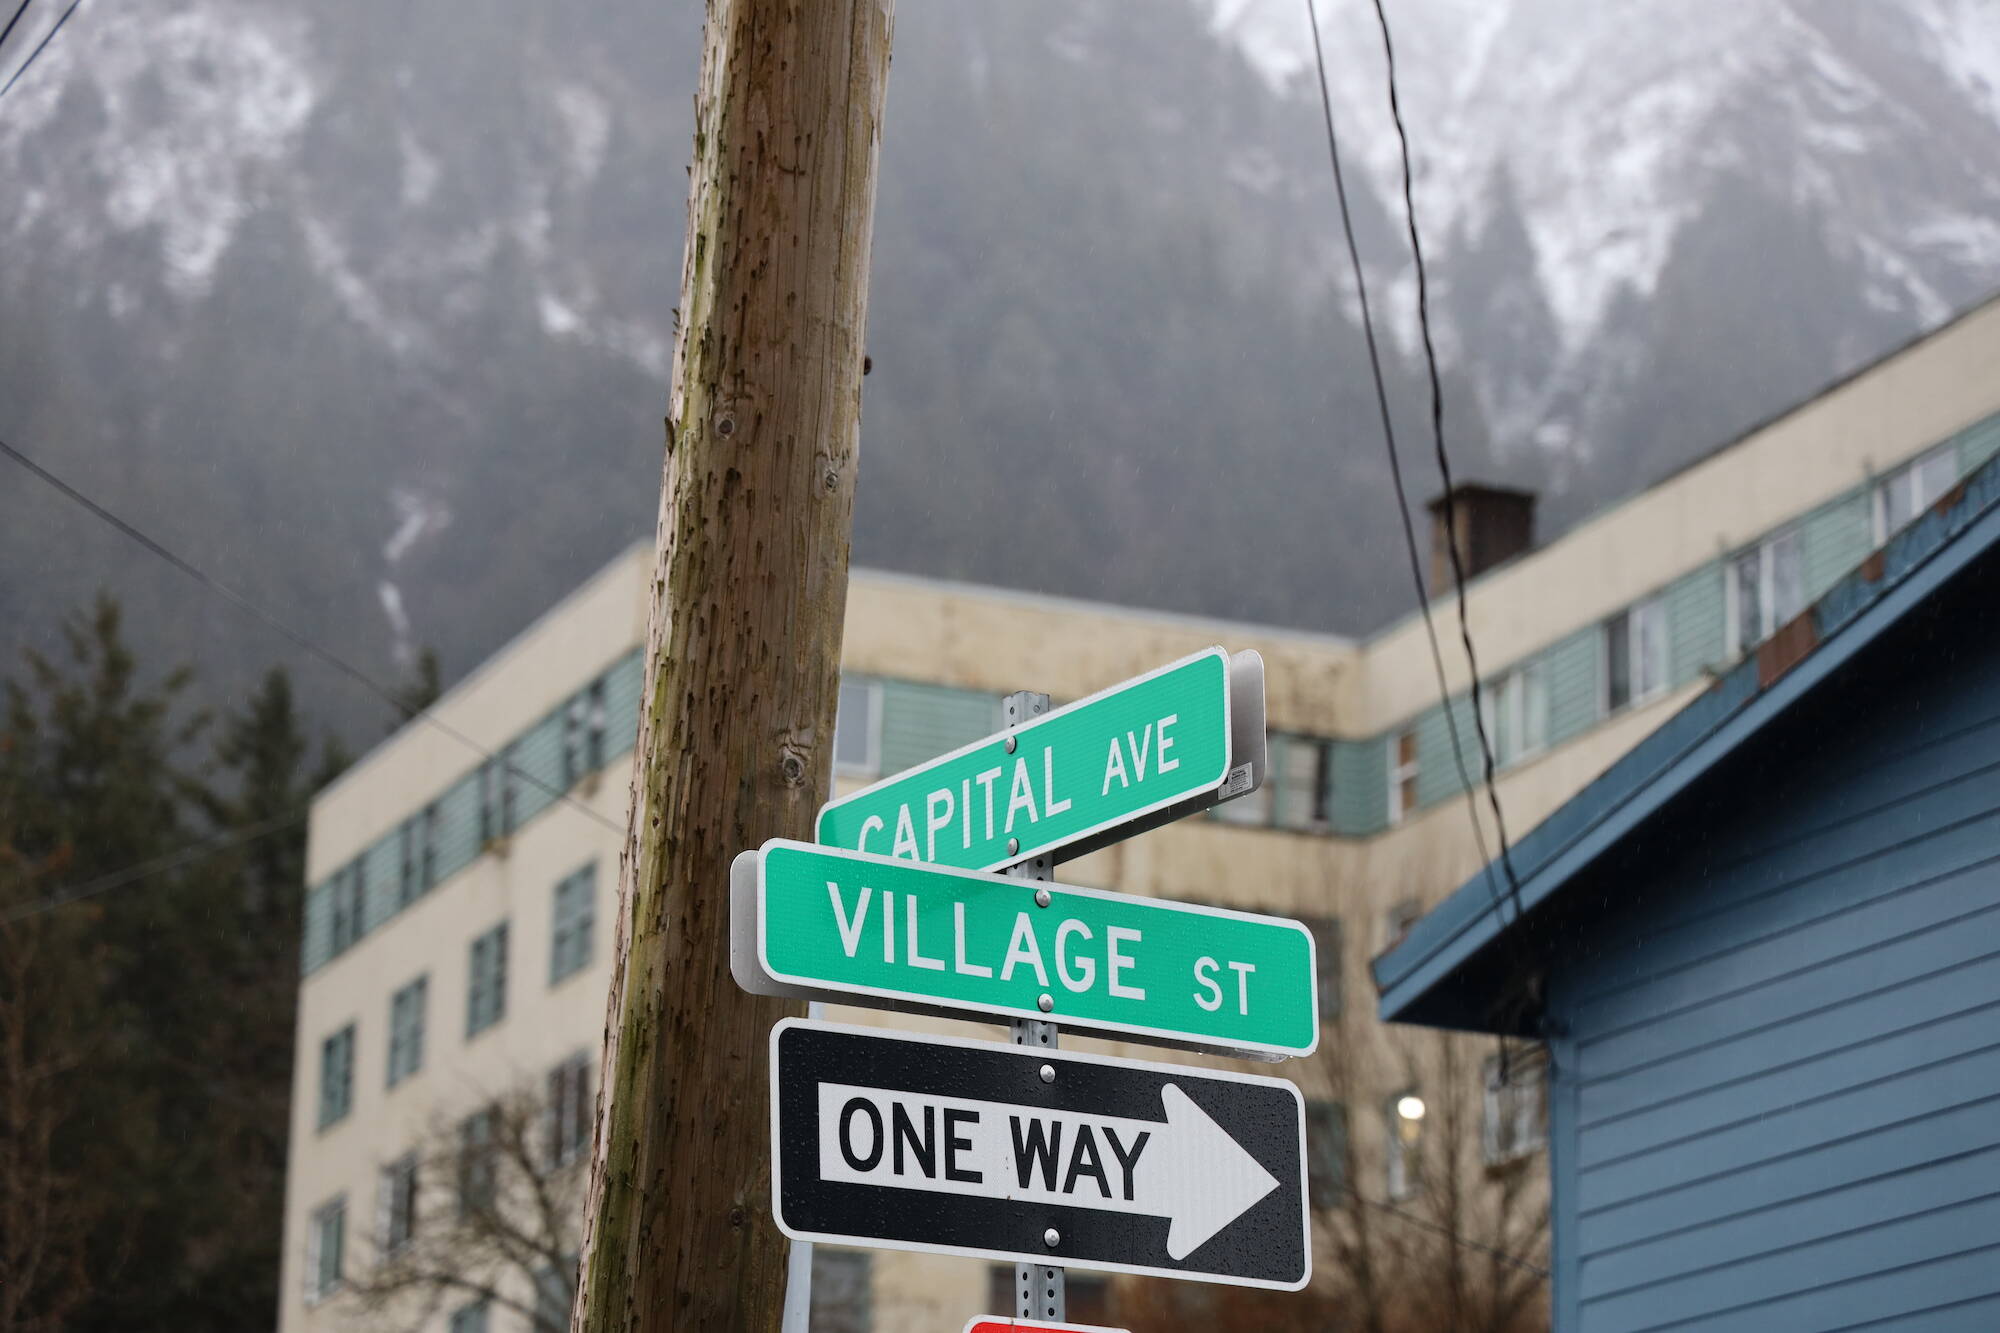 A parcel of land just off the corner of Capital Avenue and Village Street in downtown Juneau was approved to be the first parcel of land owned by the Central Council of the Tlingit and Haida Indian Tribes of Alaska to be put into federal trust, however, the state of Alaska filed a lawsuit against the federal government and asked the U.S. District Court of Alaska to reverse the federal government’s decision, return the land to Tlingit and Haida and stop future land-into-trust applications. (Clarise Larson / Juneau Empire)